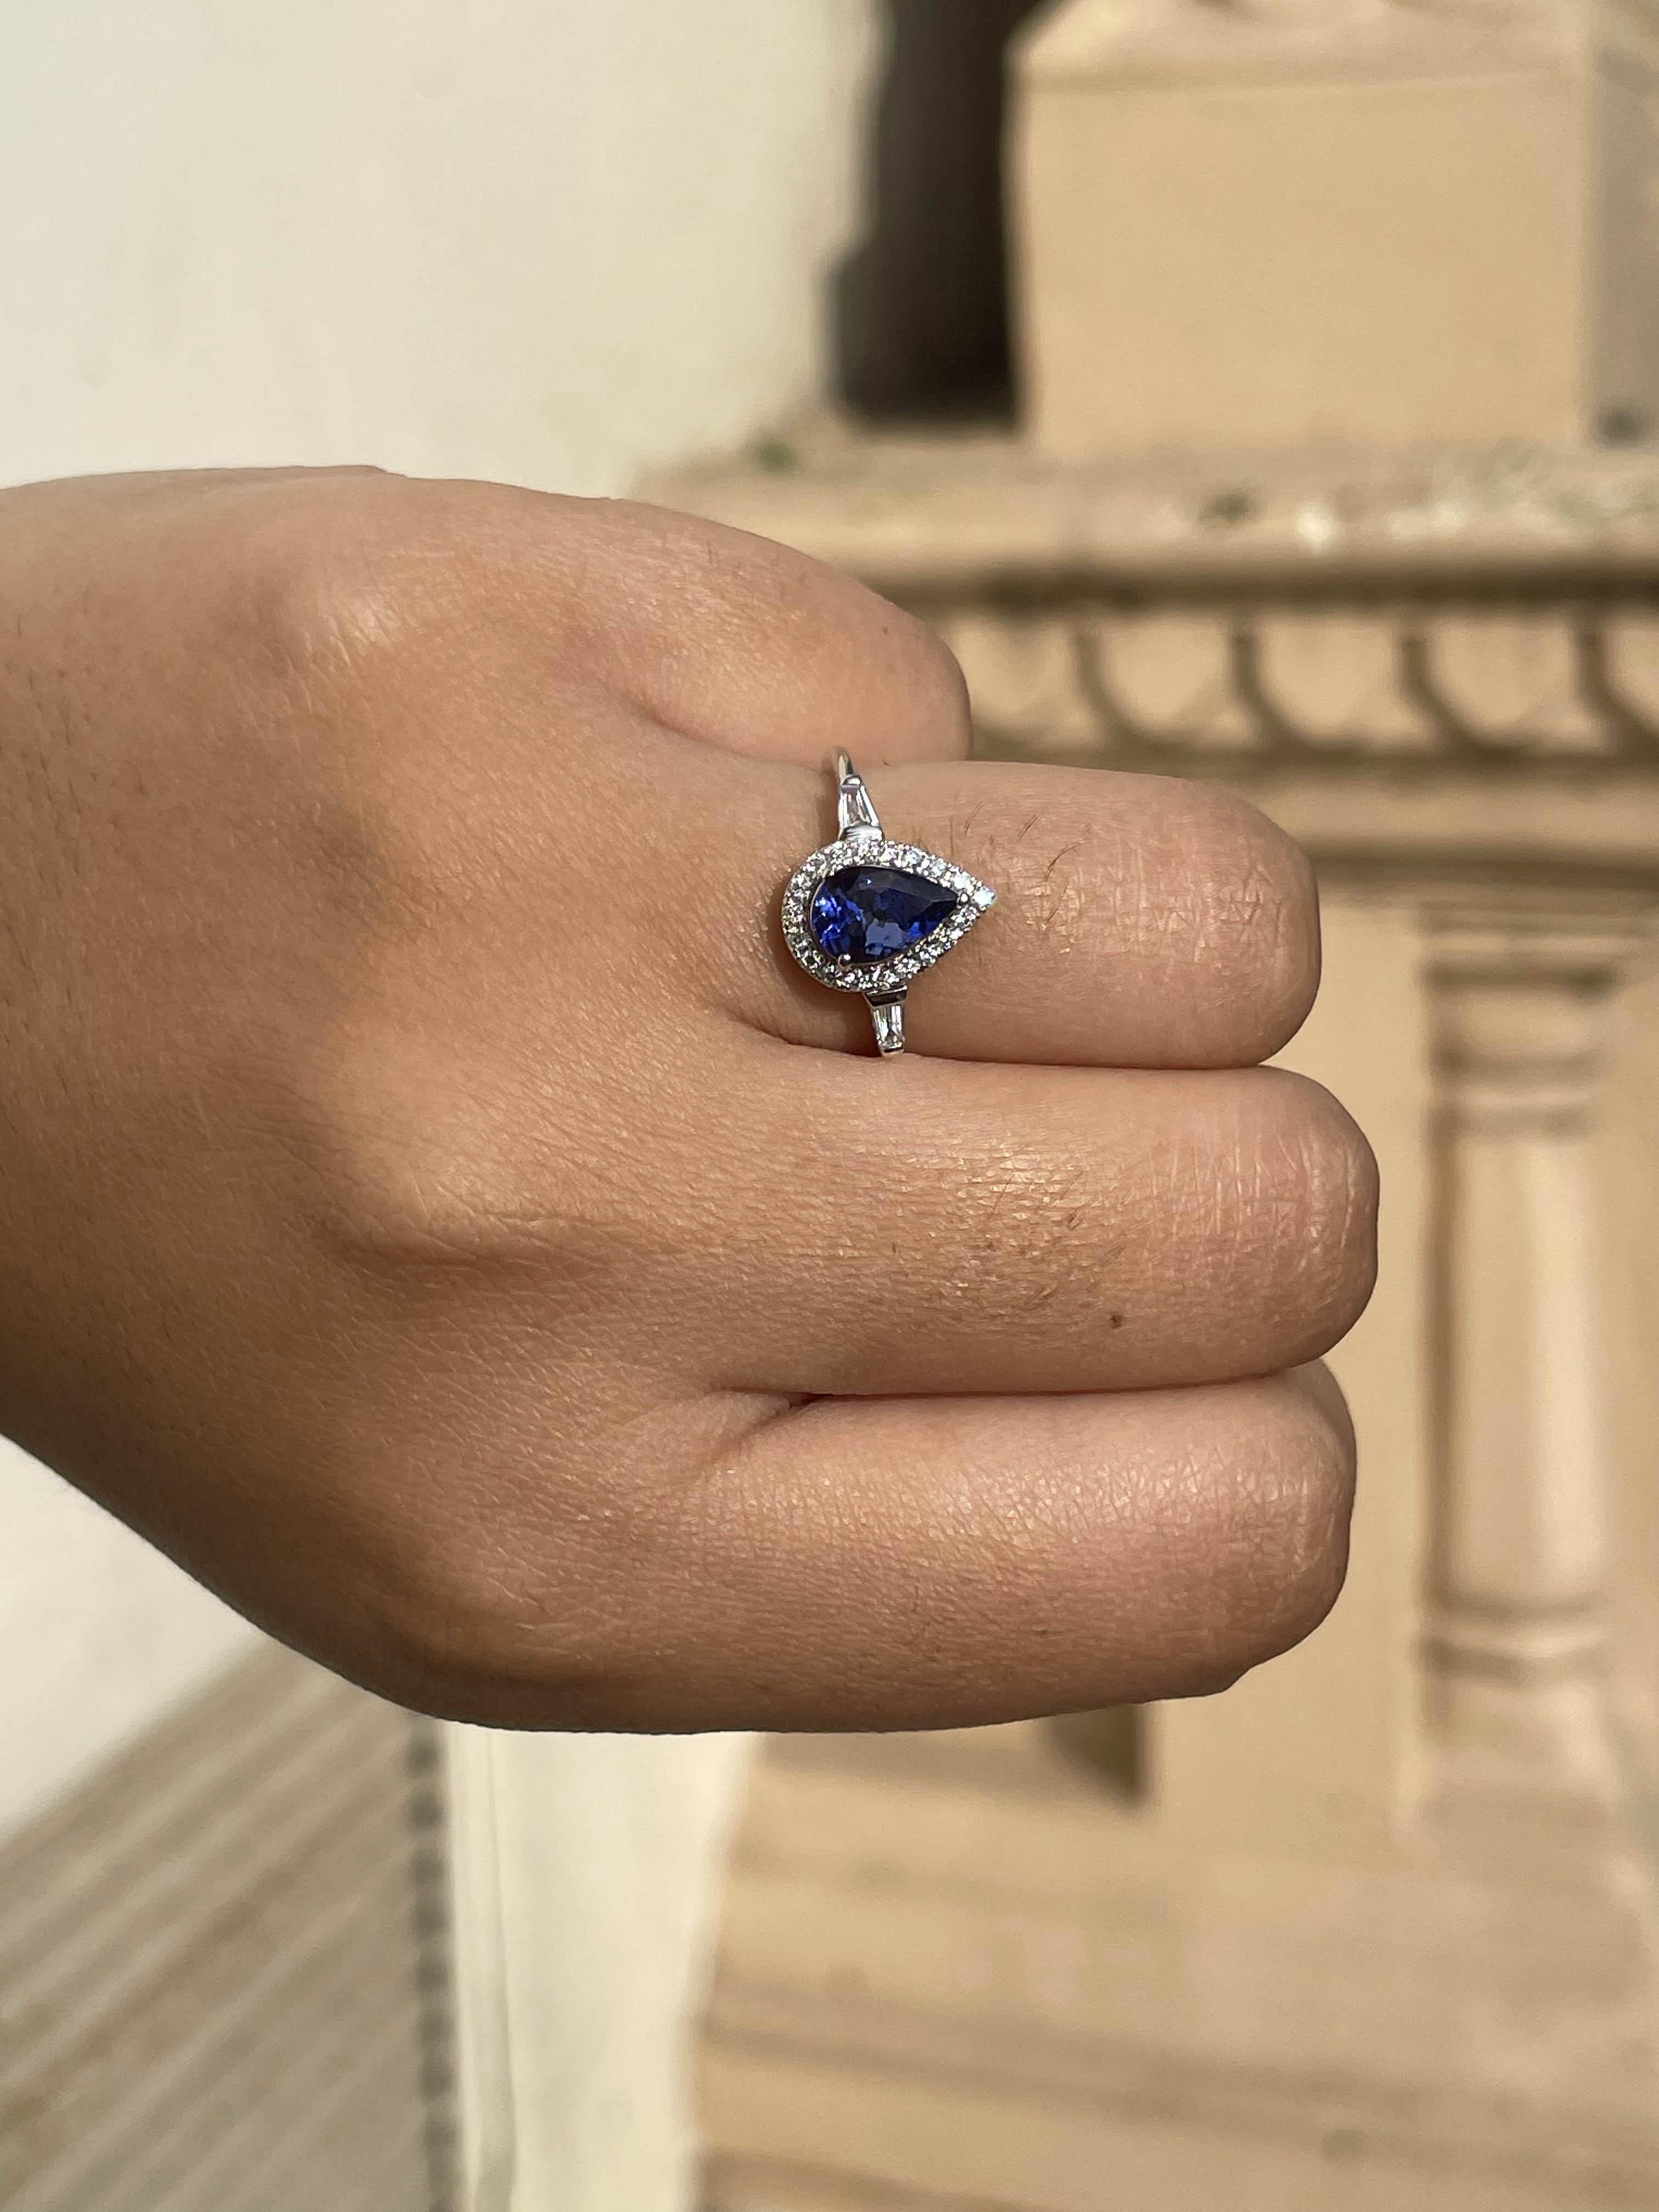 For Sale:  1.1 CTW Pear Shaped Tanzanite and Diamond Ring in 18k Solid White Gold 13